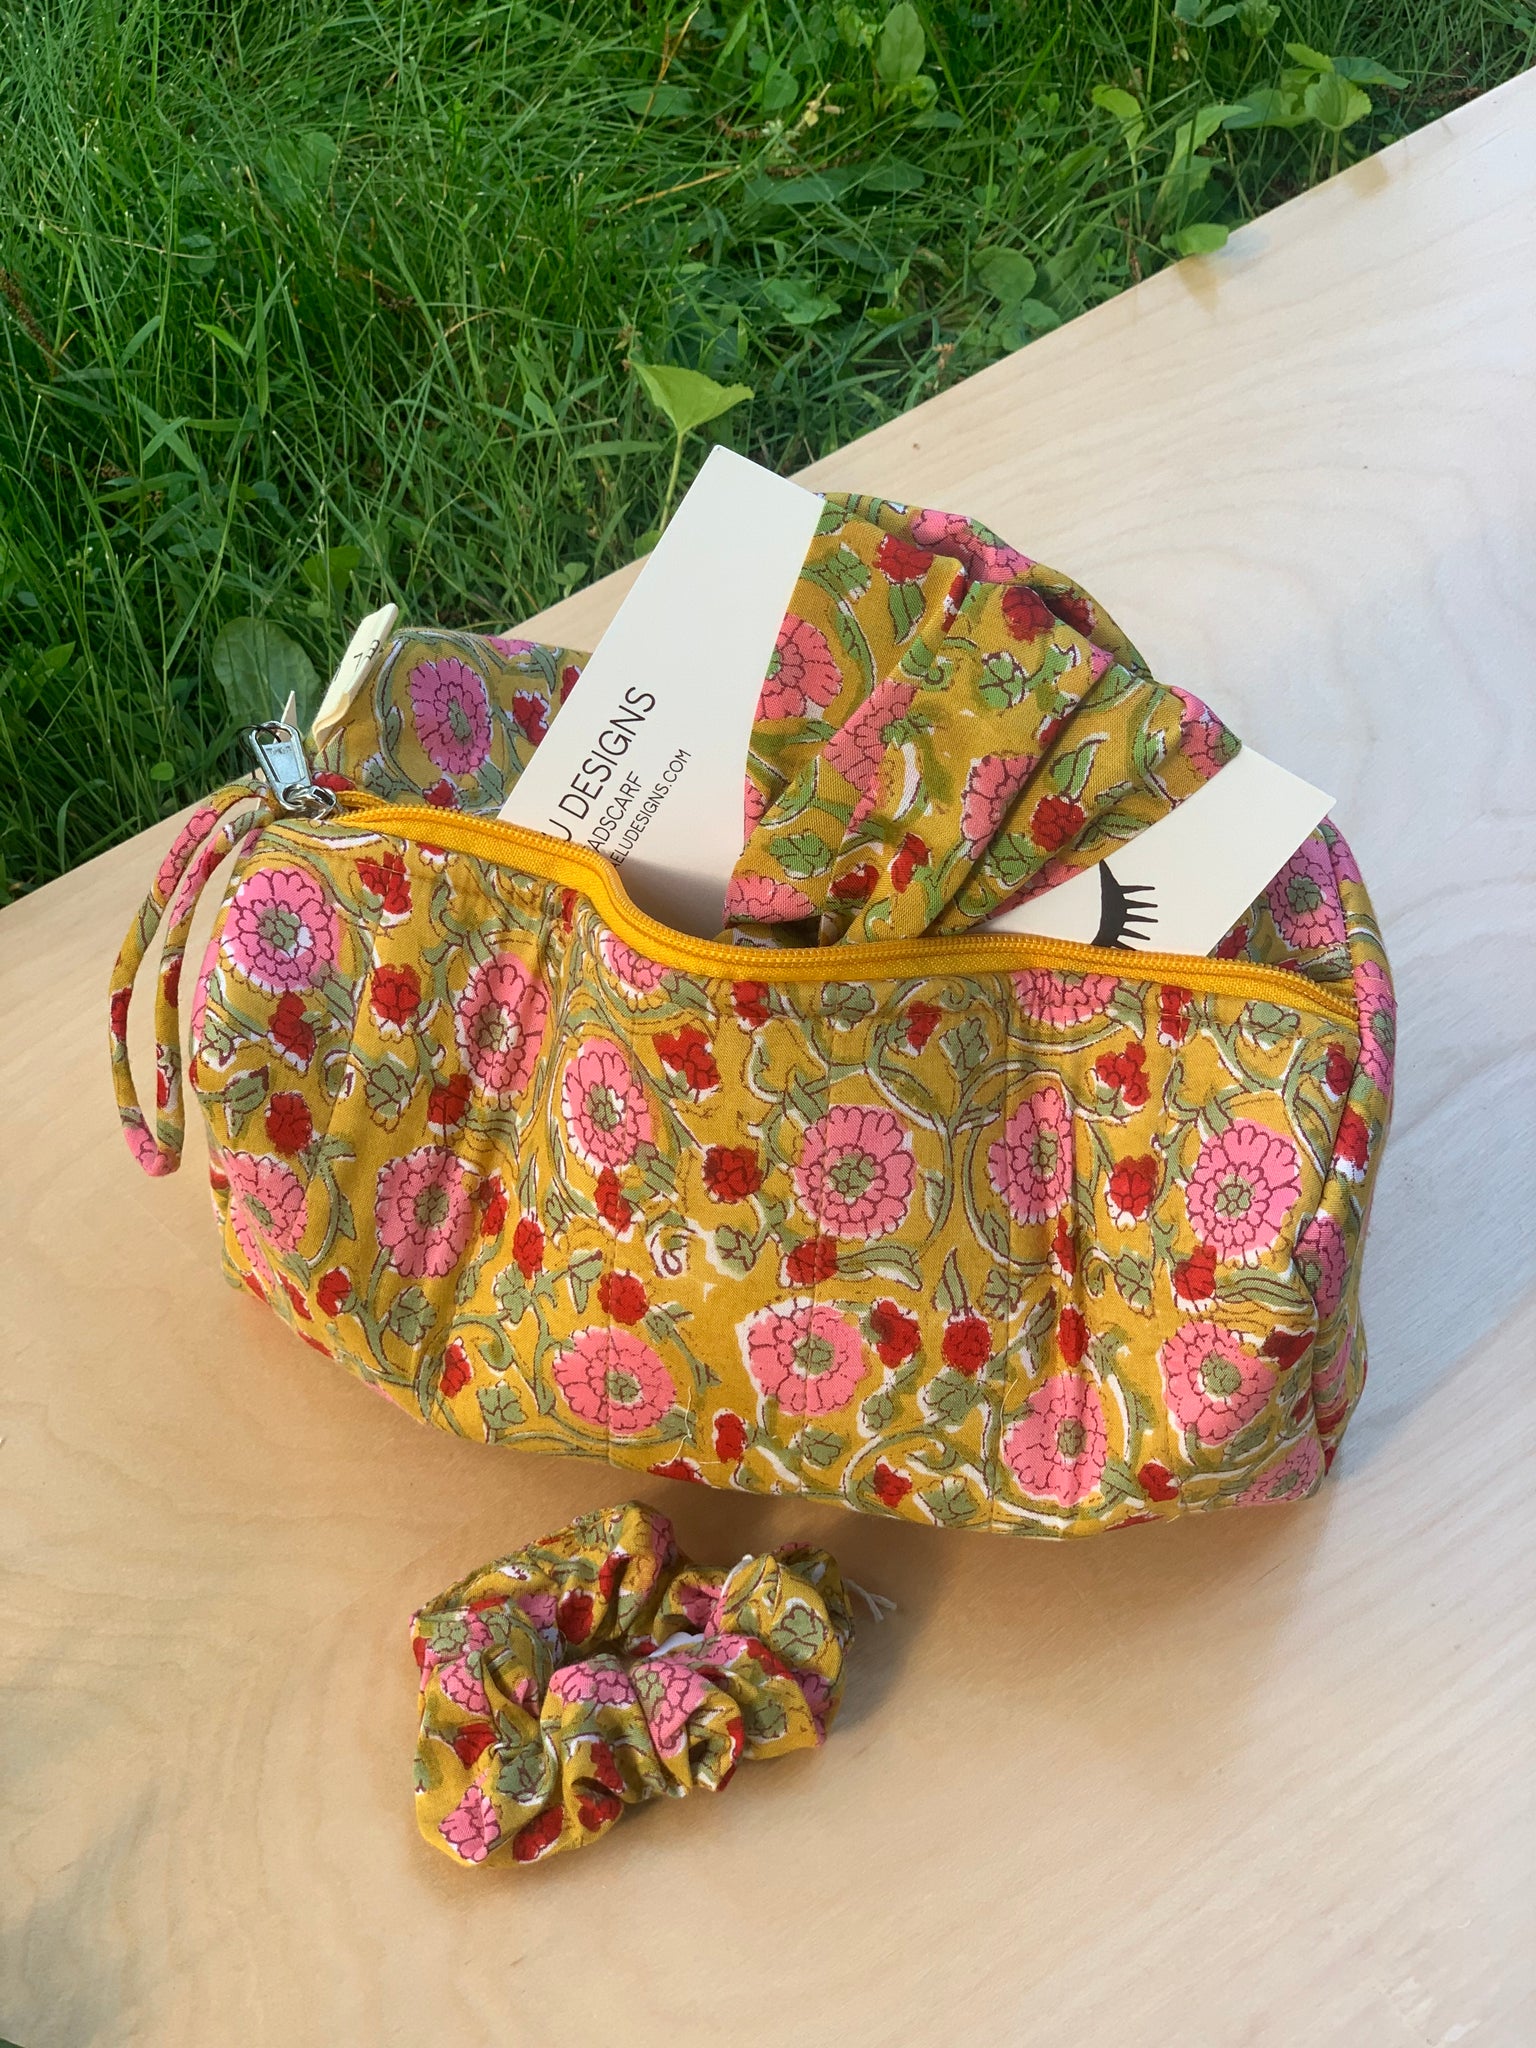 Maelu Designs Makeup bag in Marisol print coordinating with Headscarf and Scrunchie